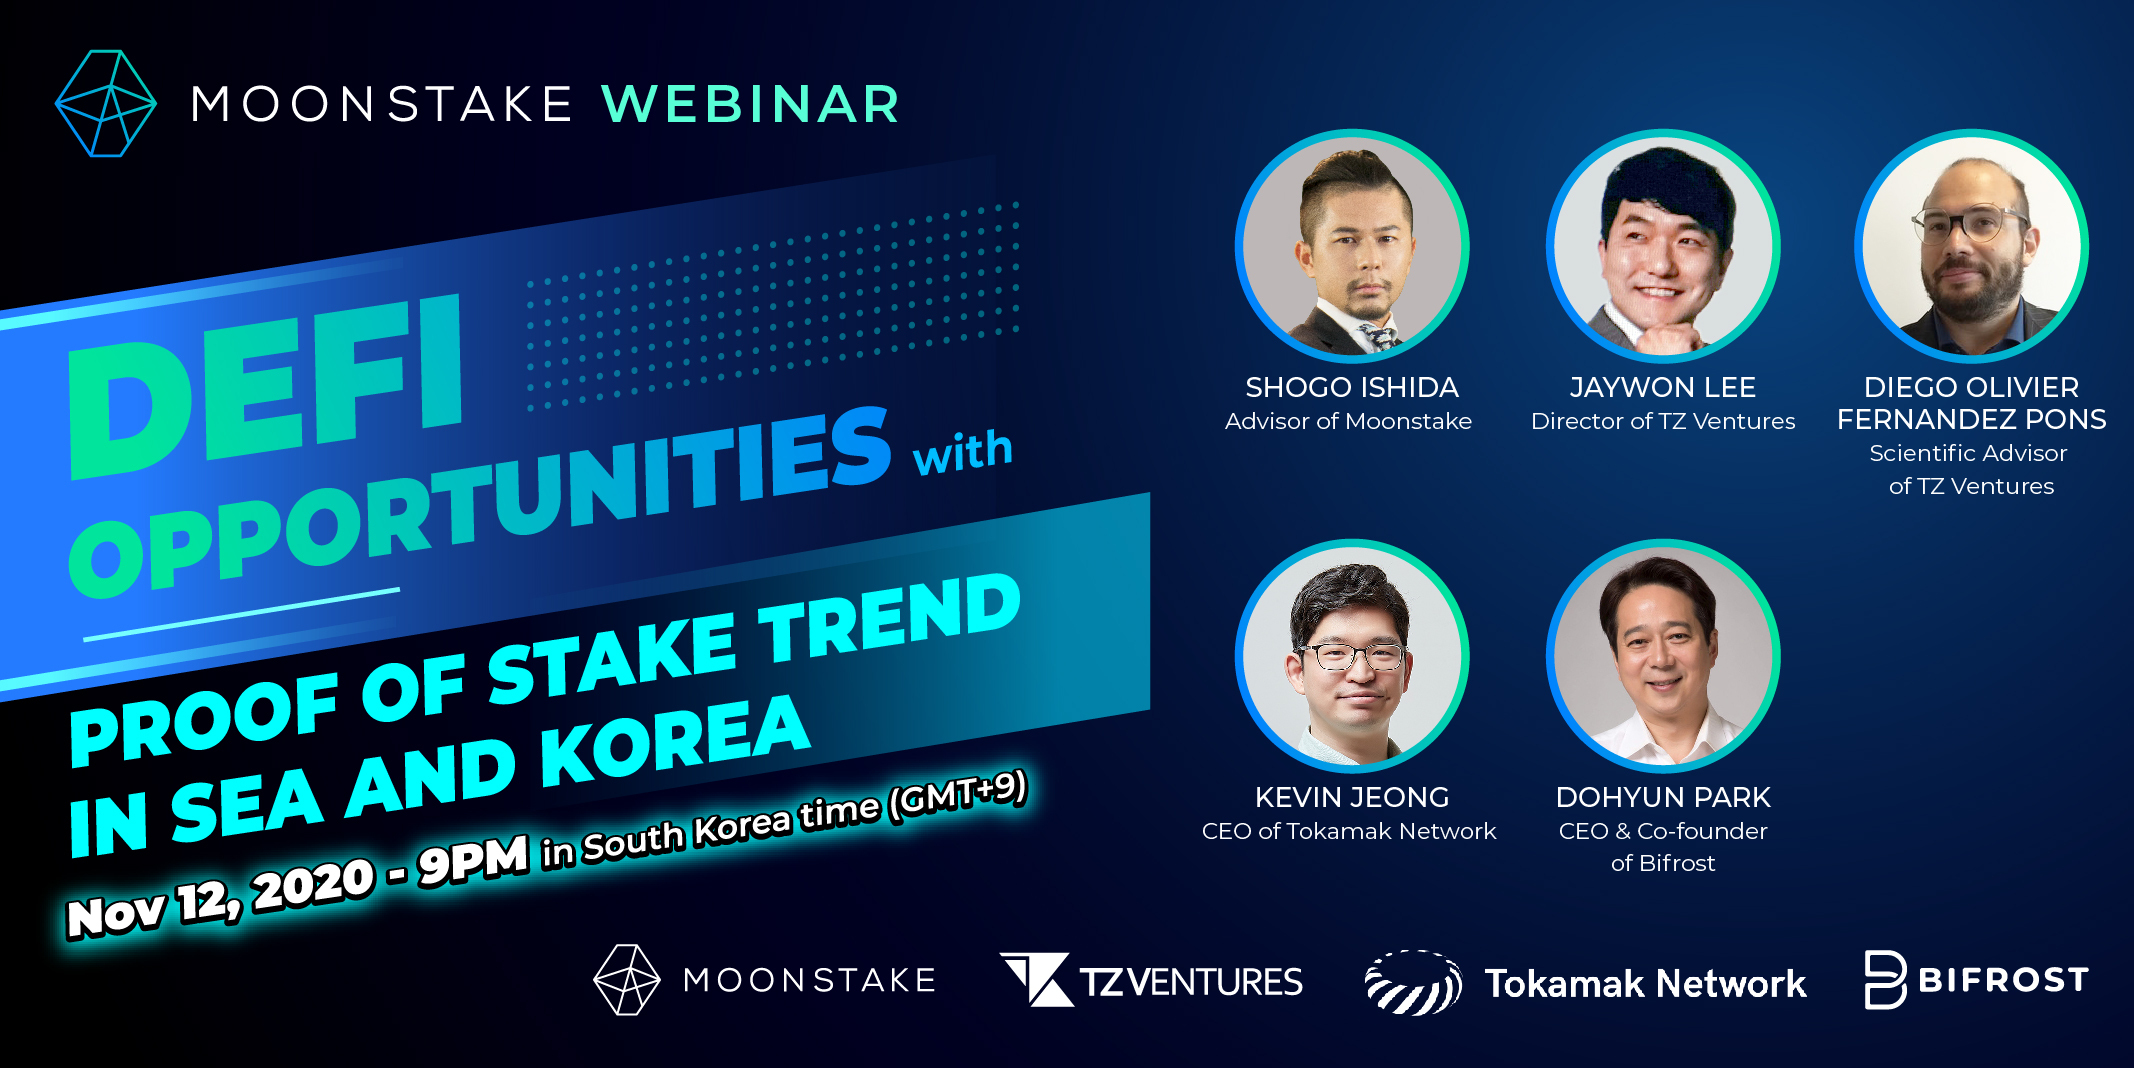 Moonstake Collaboration Webinar: “Asia's Proof of Stake Trends” and “DeFi's  Current Status and Destinations” – Moonstake